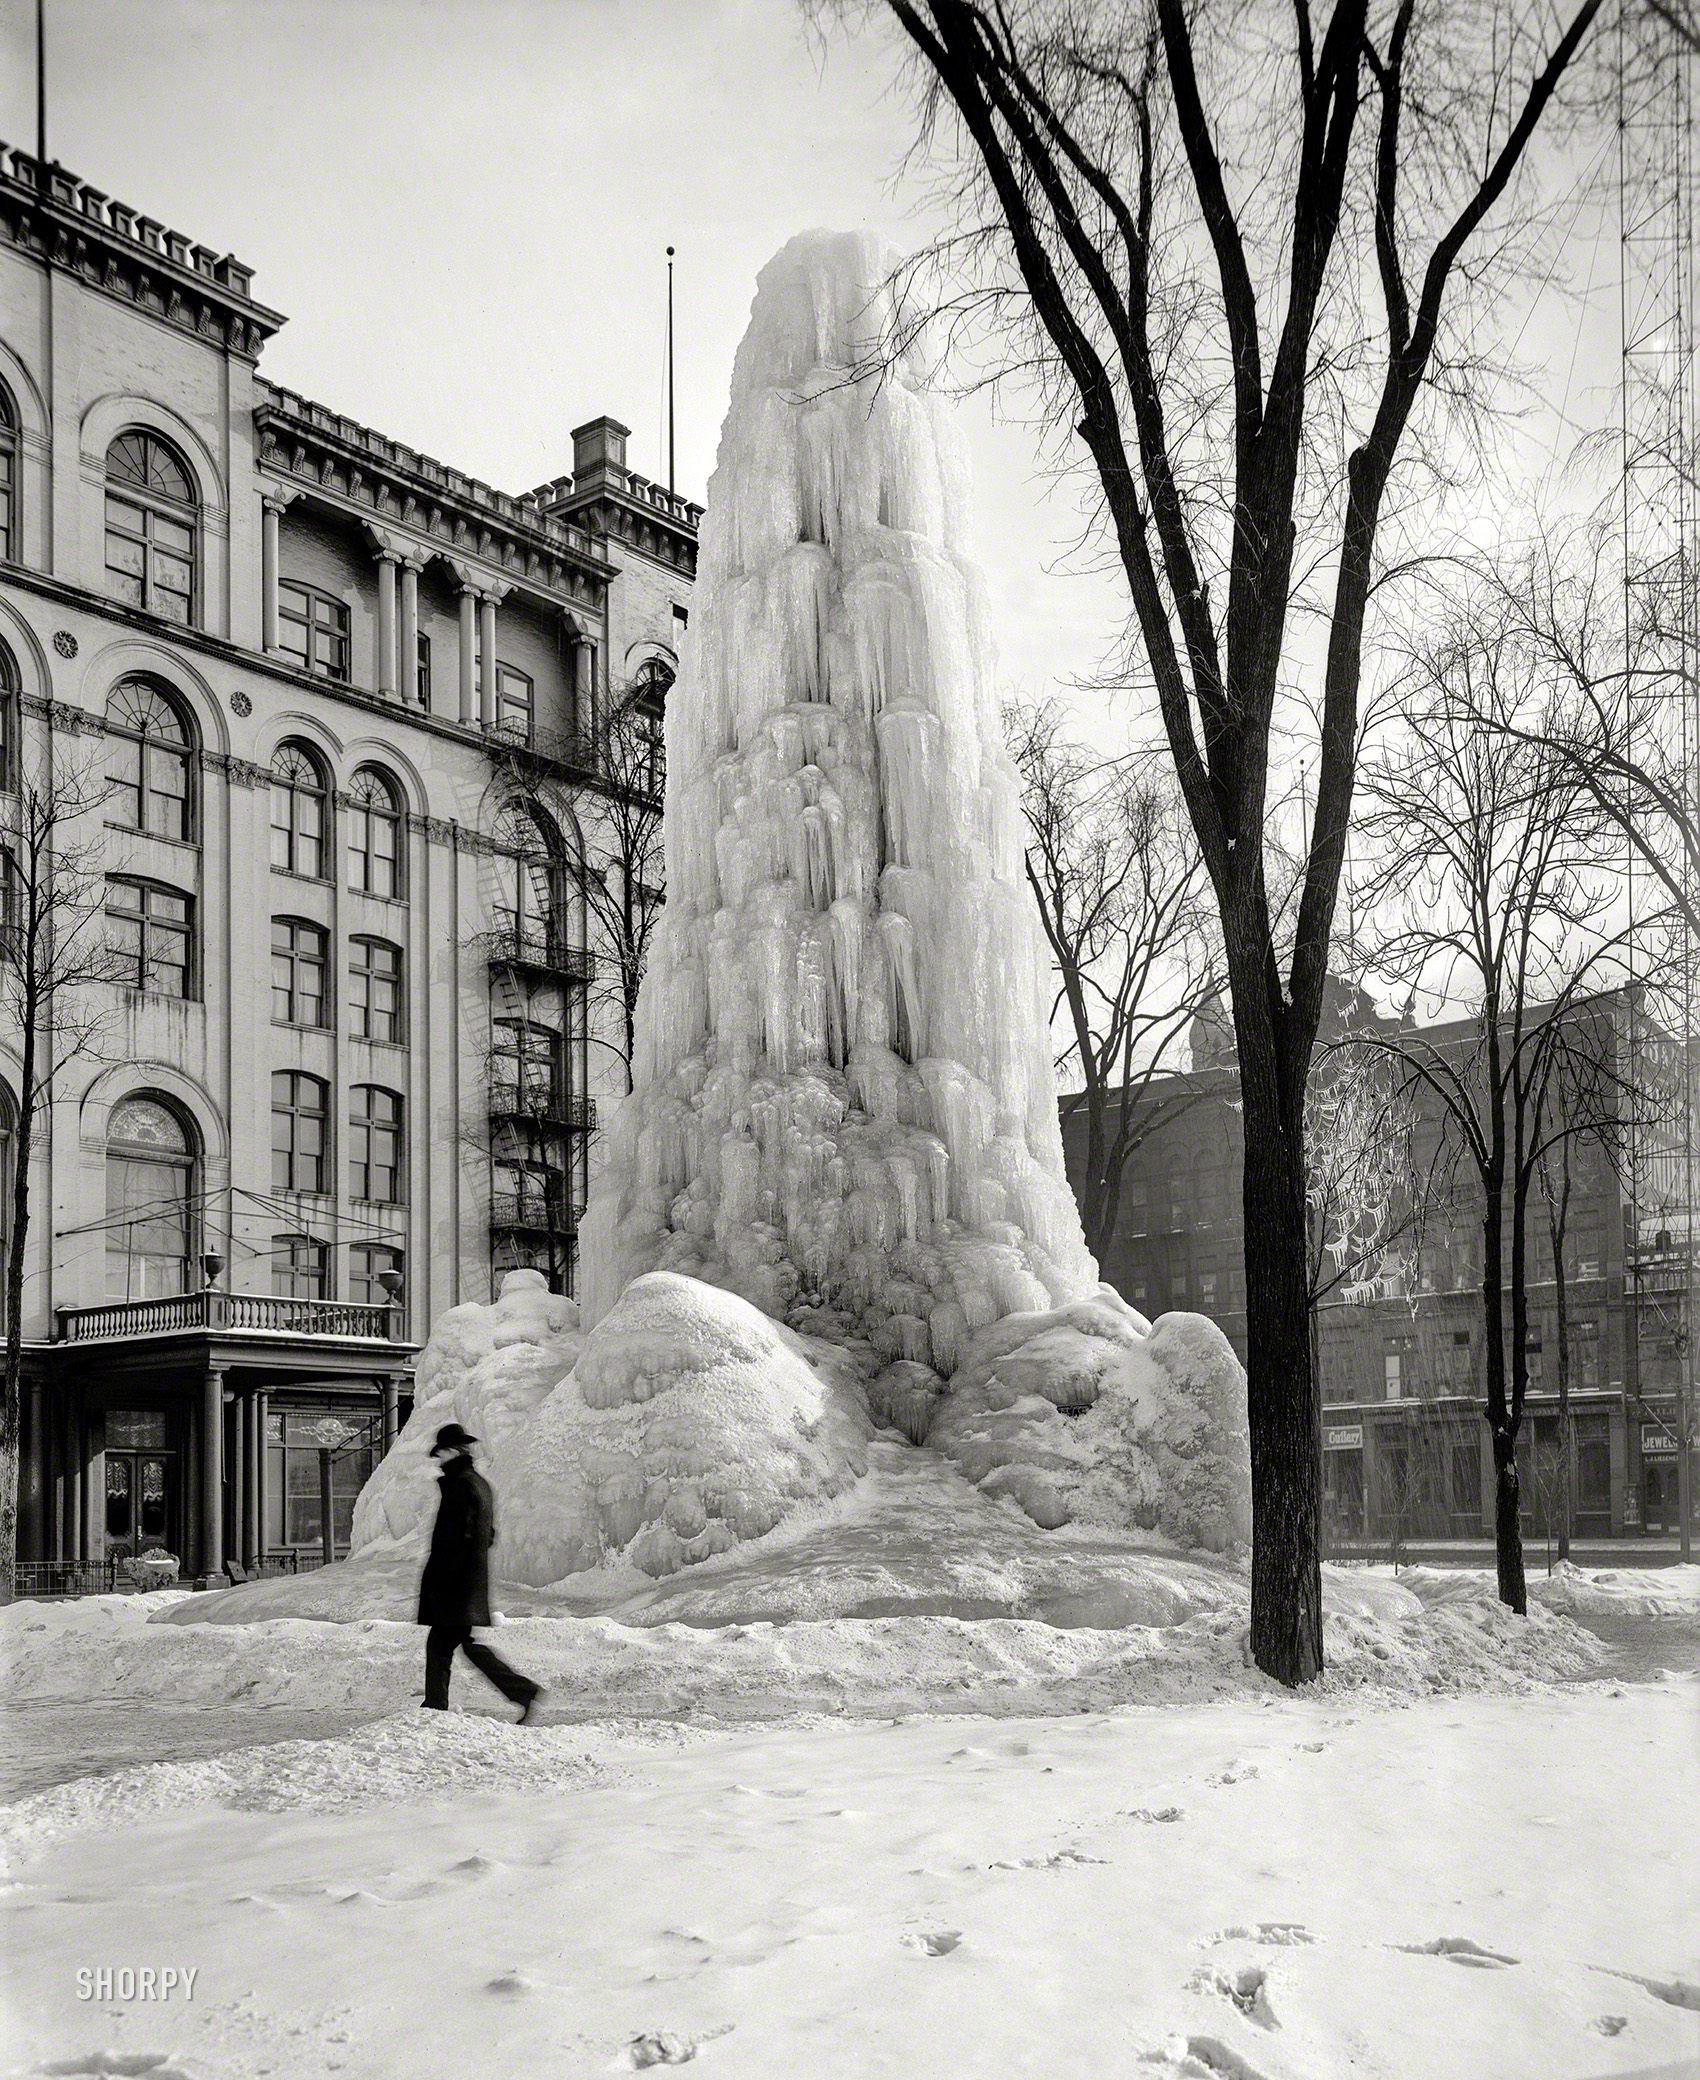 Detroit circa 1906. "Ice fountain on Washington Boulevard." Yet another per&shy;spec&shy;tive on this monument to hard water. 8x10 inch glass negative. View full size.